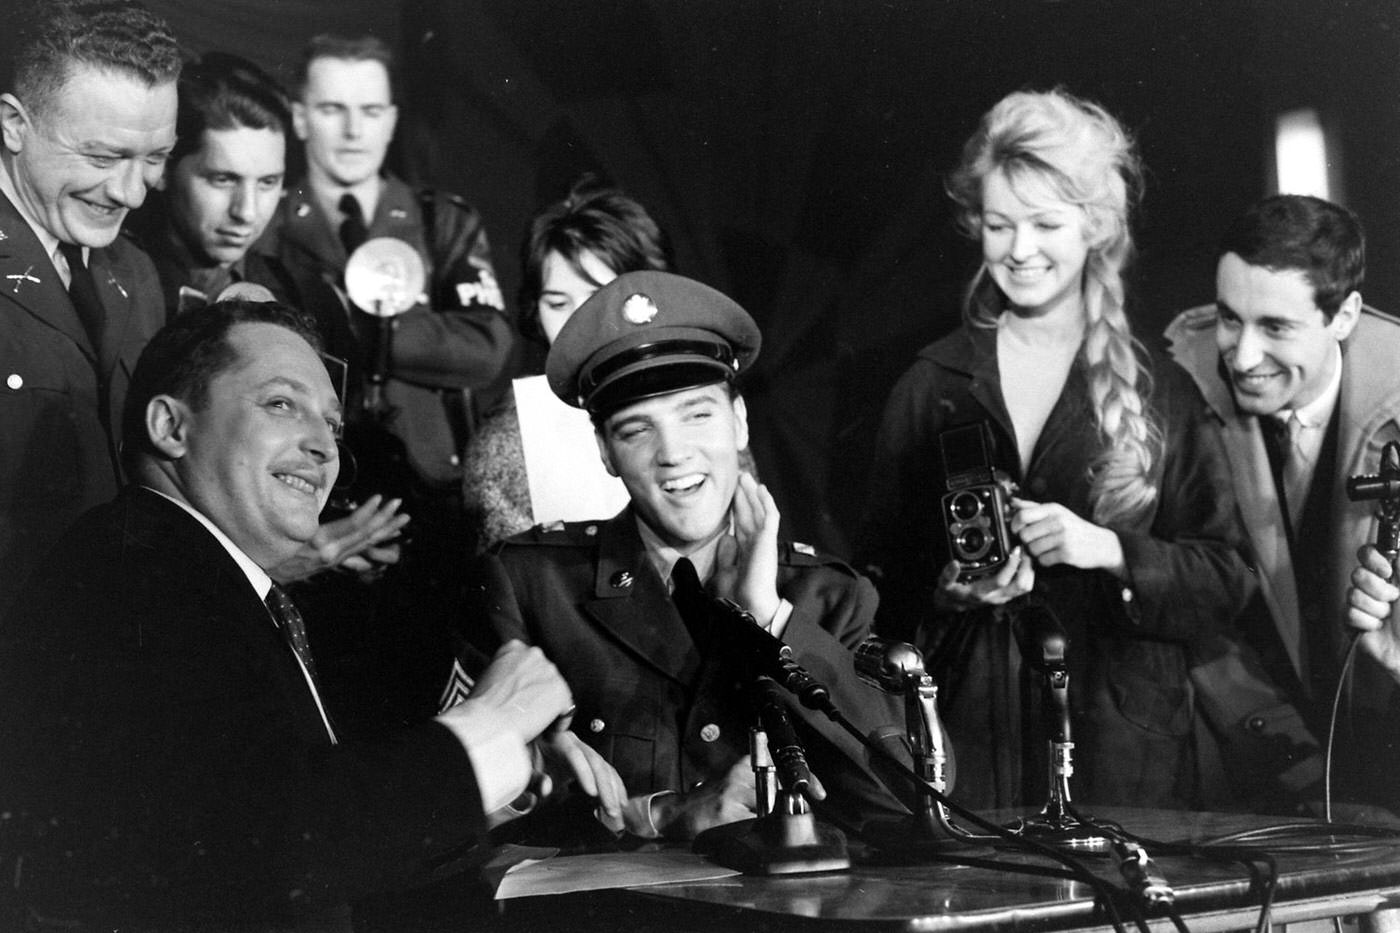 Sgt. Elvis Presley at a press conference before leaving Germany, March 1960.